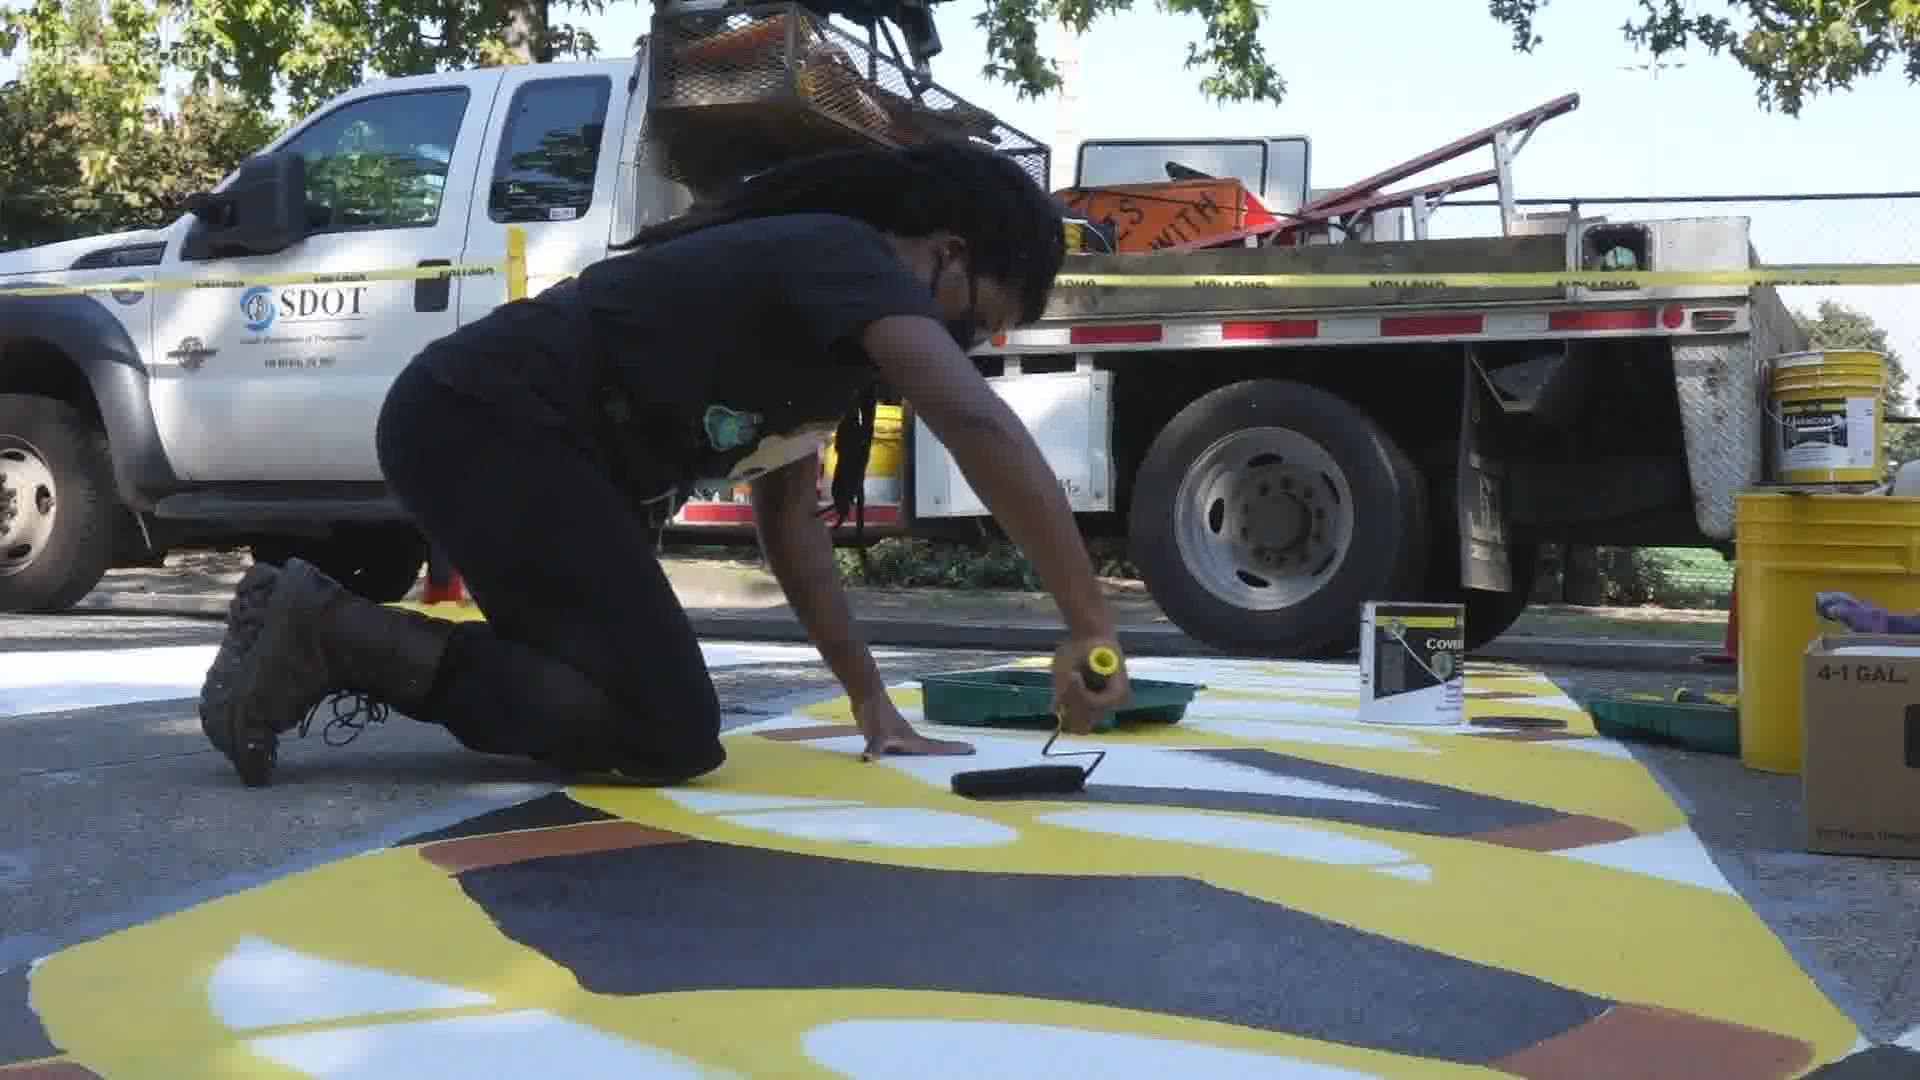 The Seattle Department of Transportation is helping artists preserve a giant Black Lives Matter mural on a street in the former CHOP/CHAZ zone of Capitol Hill.